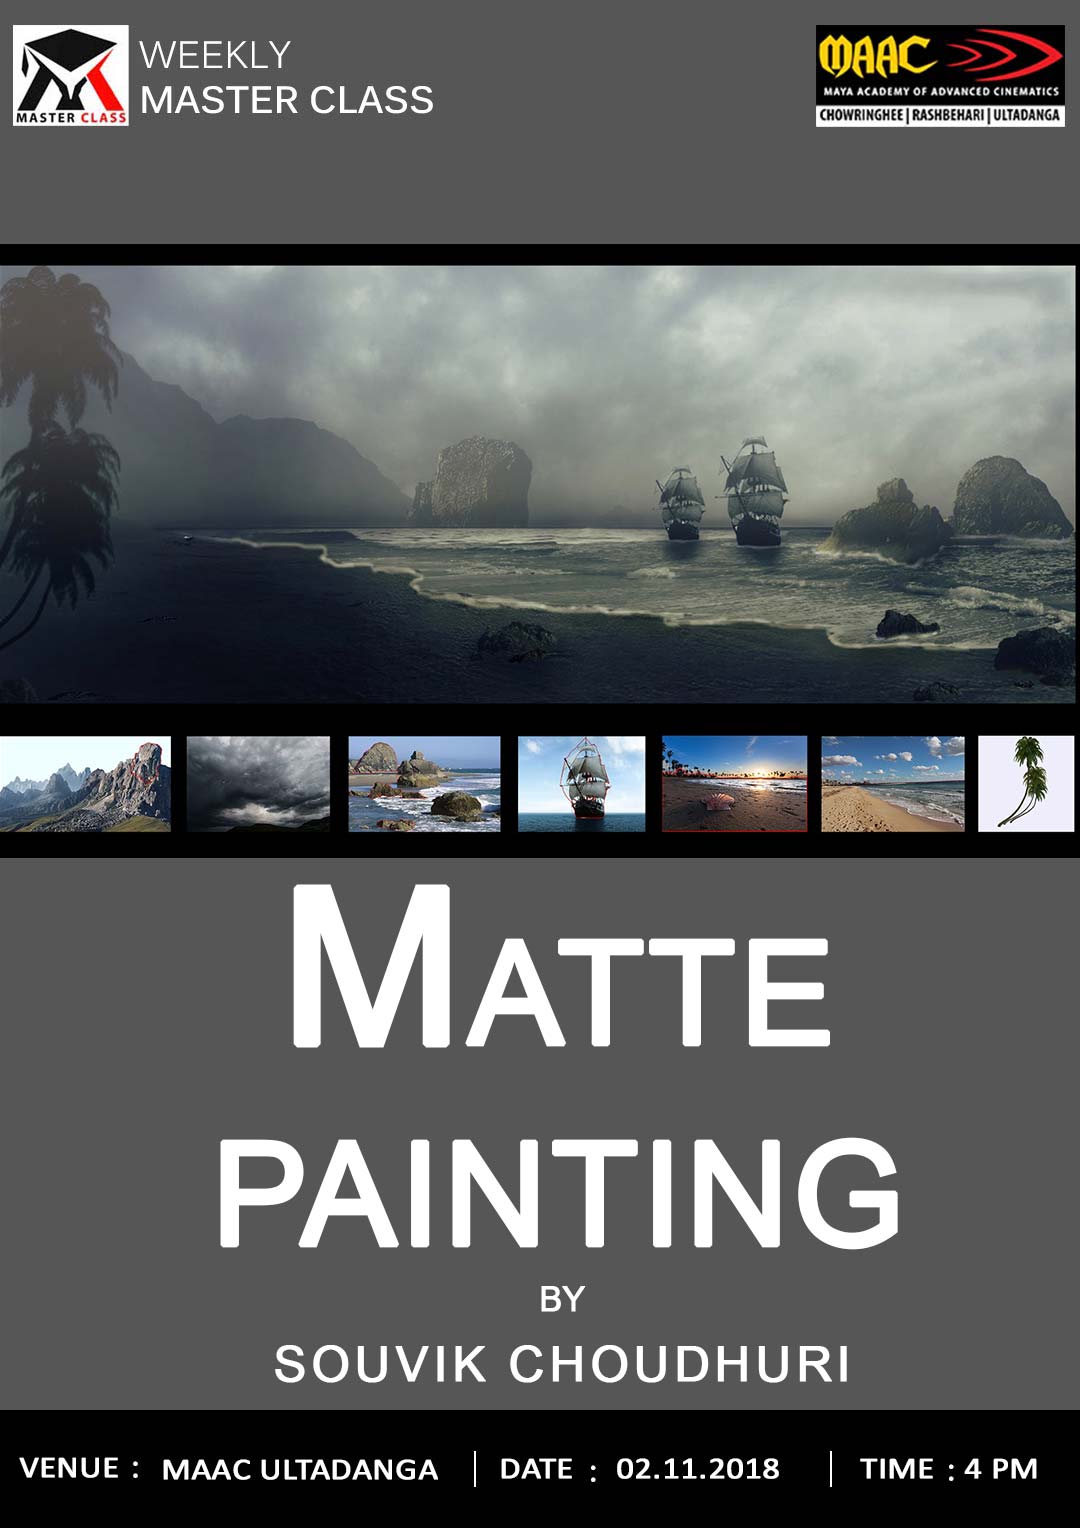 Weekly Master Class on Matte Painting